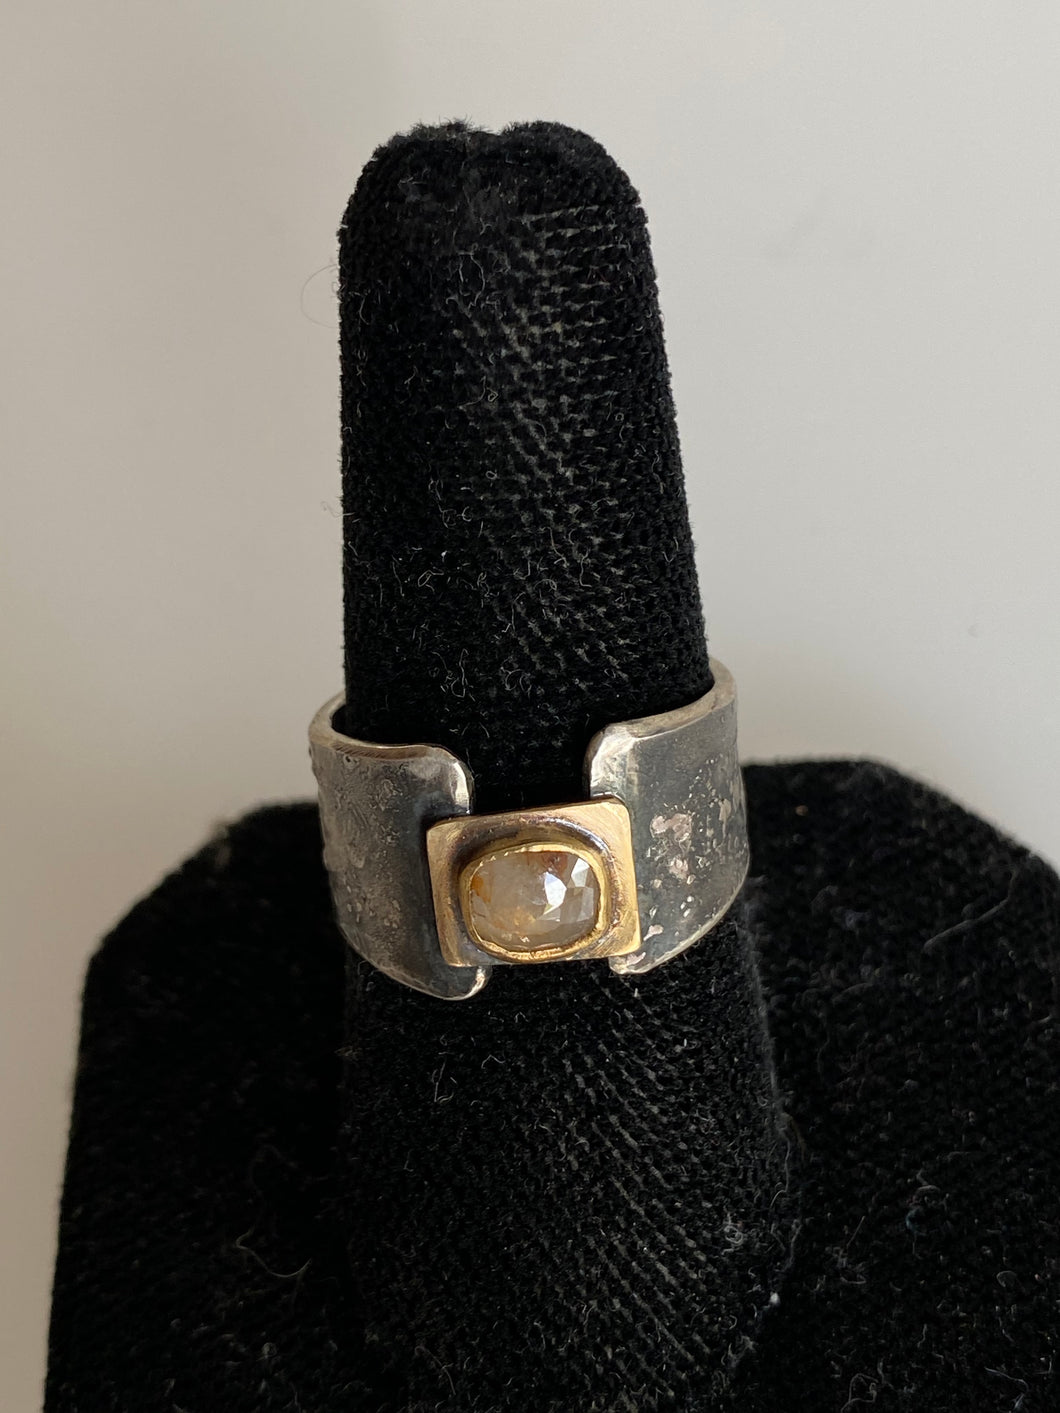 Rose-Cut Diamond, gold and silver Ring